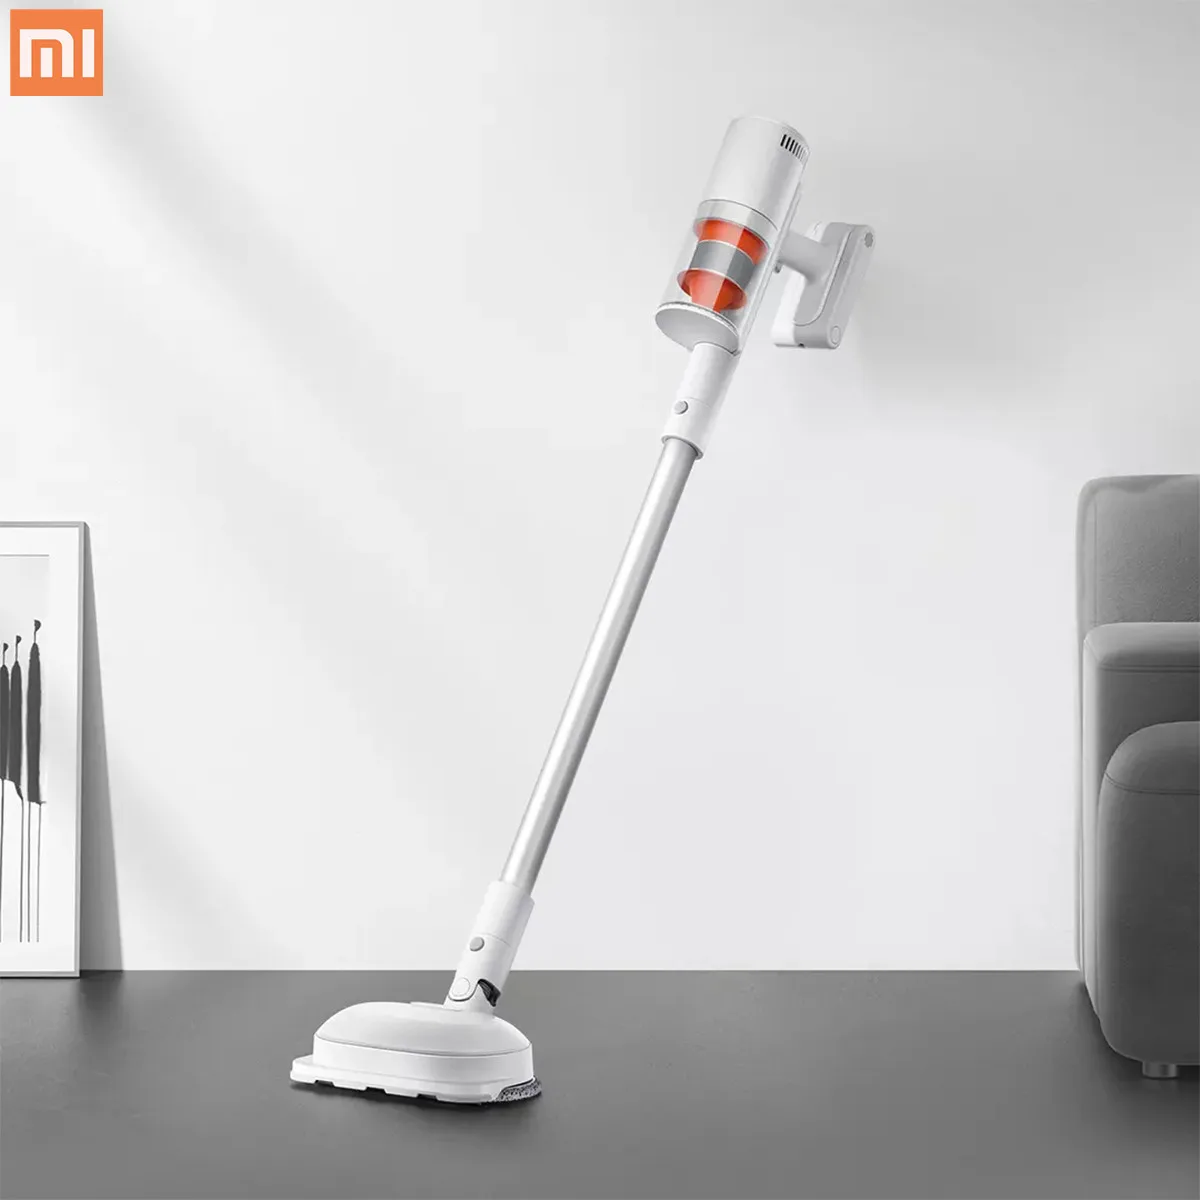 Xiaomi Mijia Handheld Wireless Vacuum Cleaner K10 Pro Household Electric Rotating Mop 150AW Cyclone Suction Multi-brush